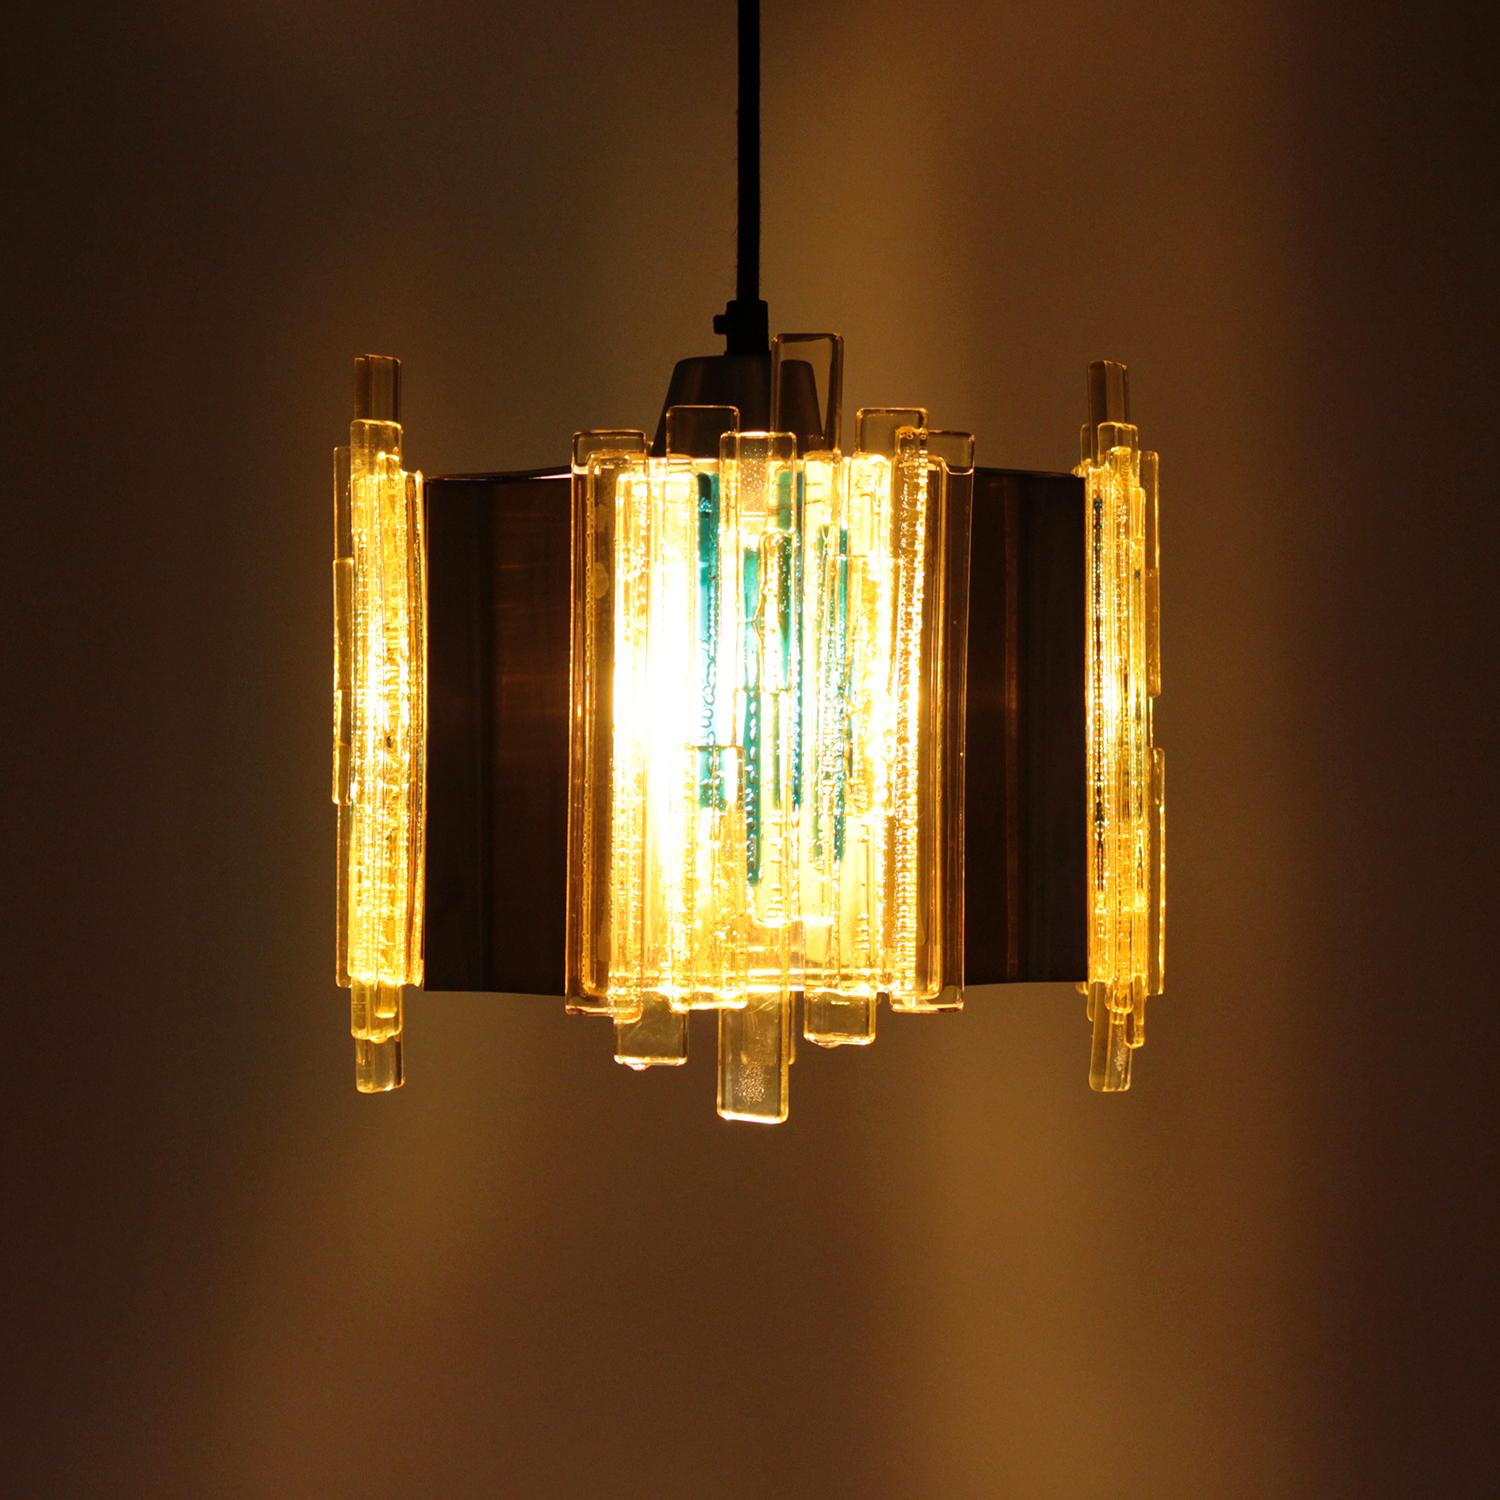 Yellow plexiglas pendant by Claus Bolby in 1970s and produced by CEBO Industri - beautiful sunny yellow Plexiglas and brass lacquered hanging lamp.

An octagon shaped metal pendant with four brass lacquered concave sides and four straight sides,